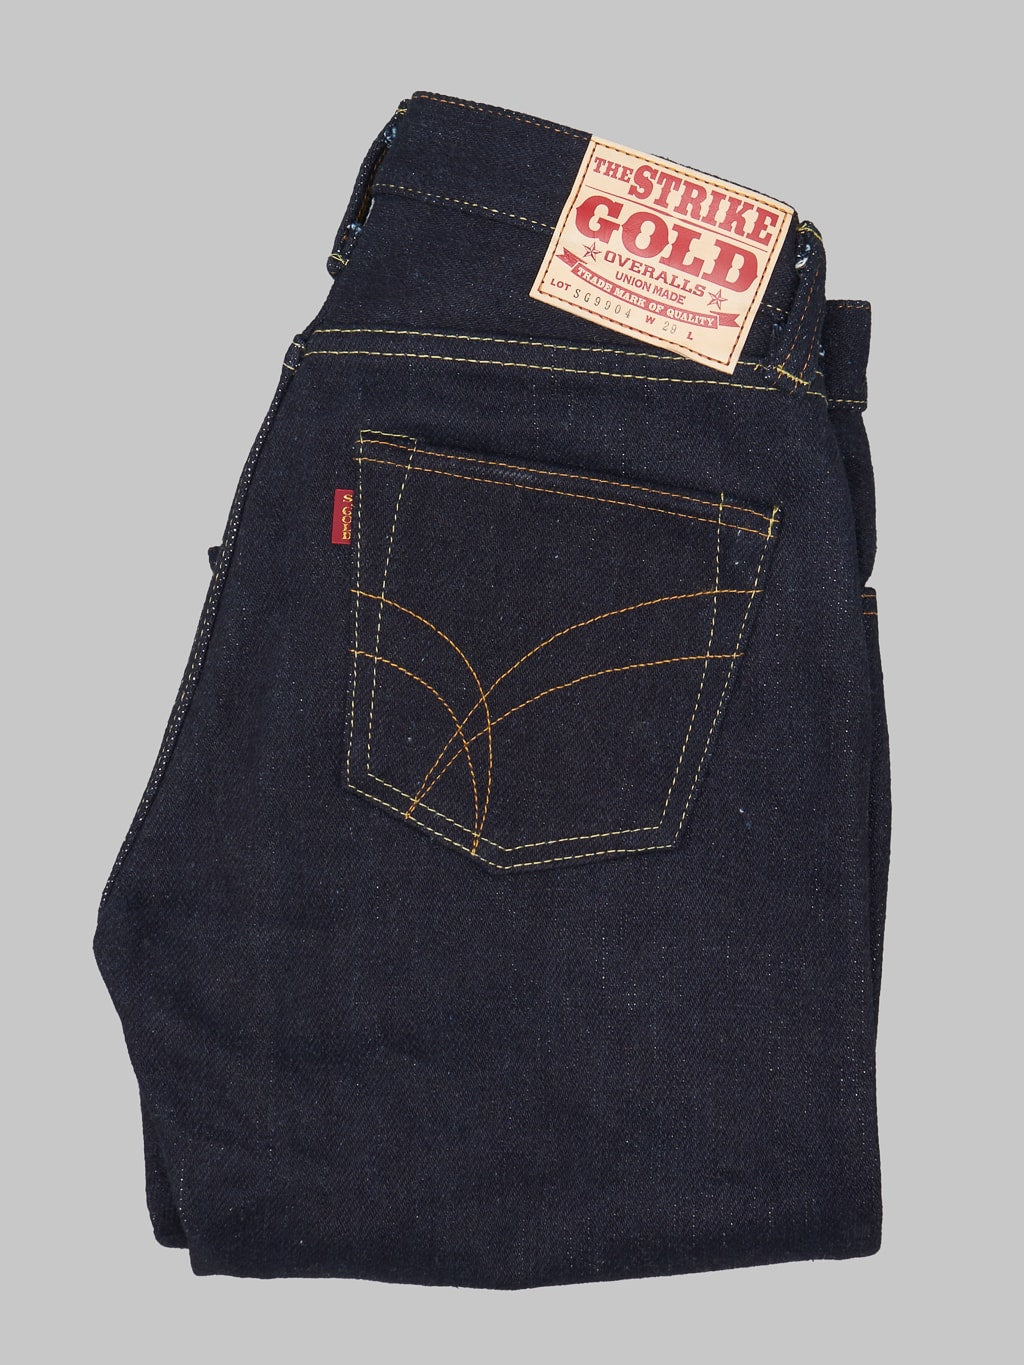 The Strike Gold Extra Heavyweight straight tapered jeans back pocket